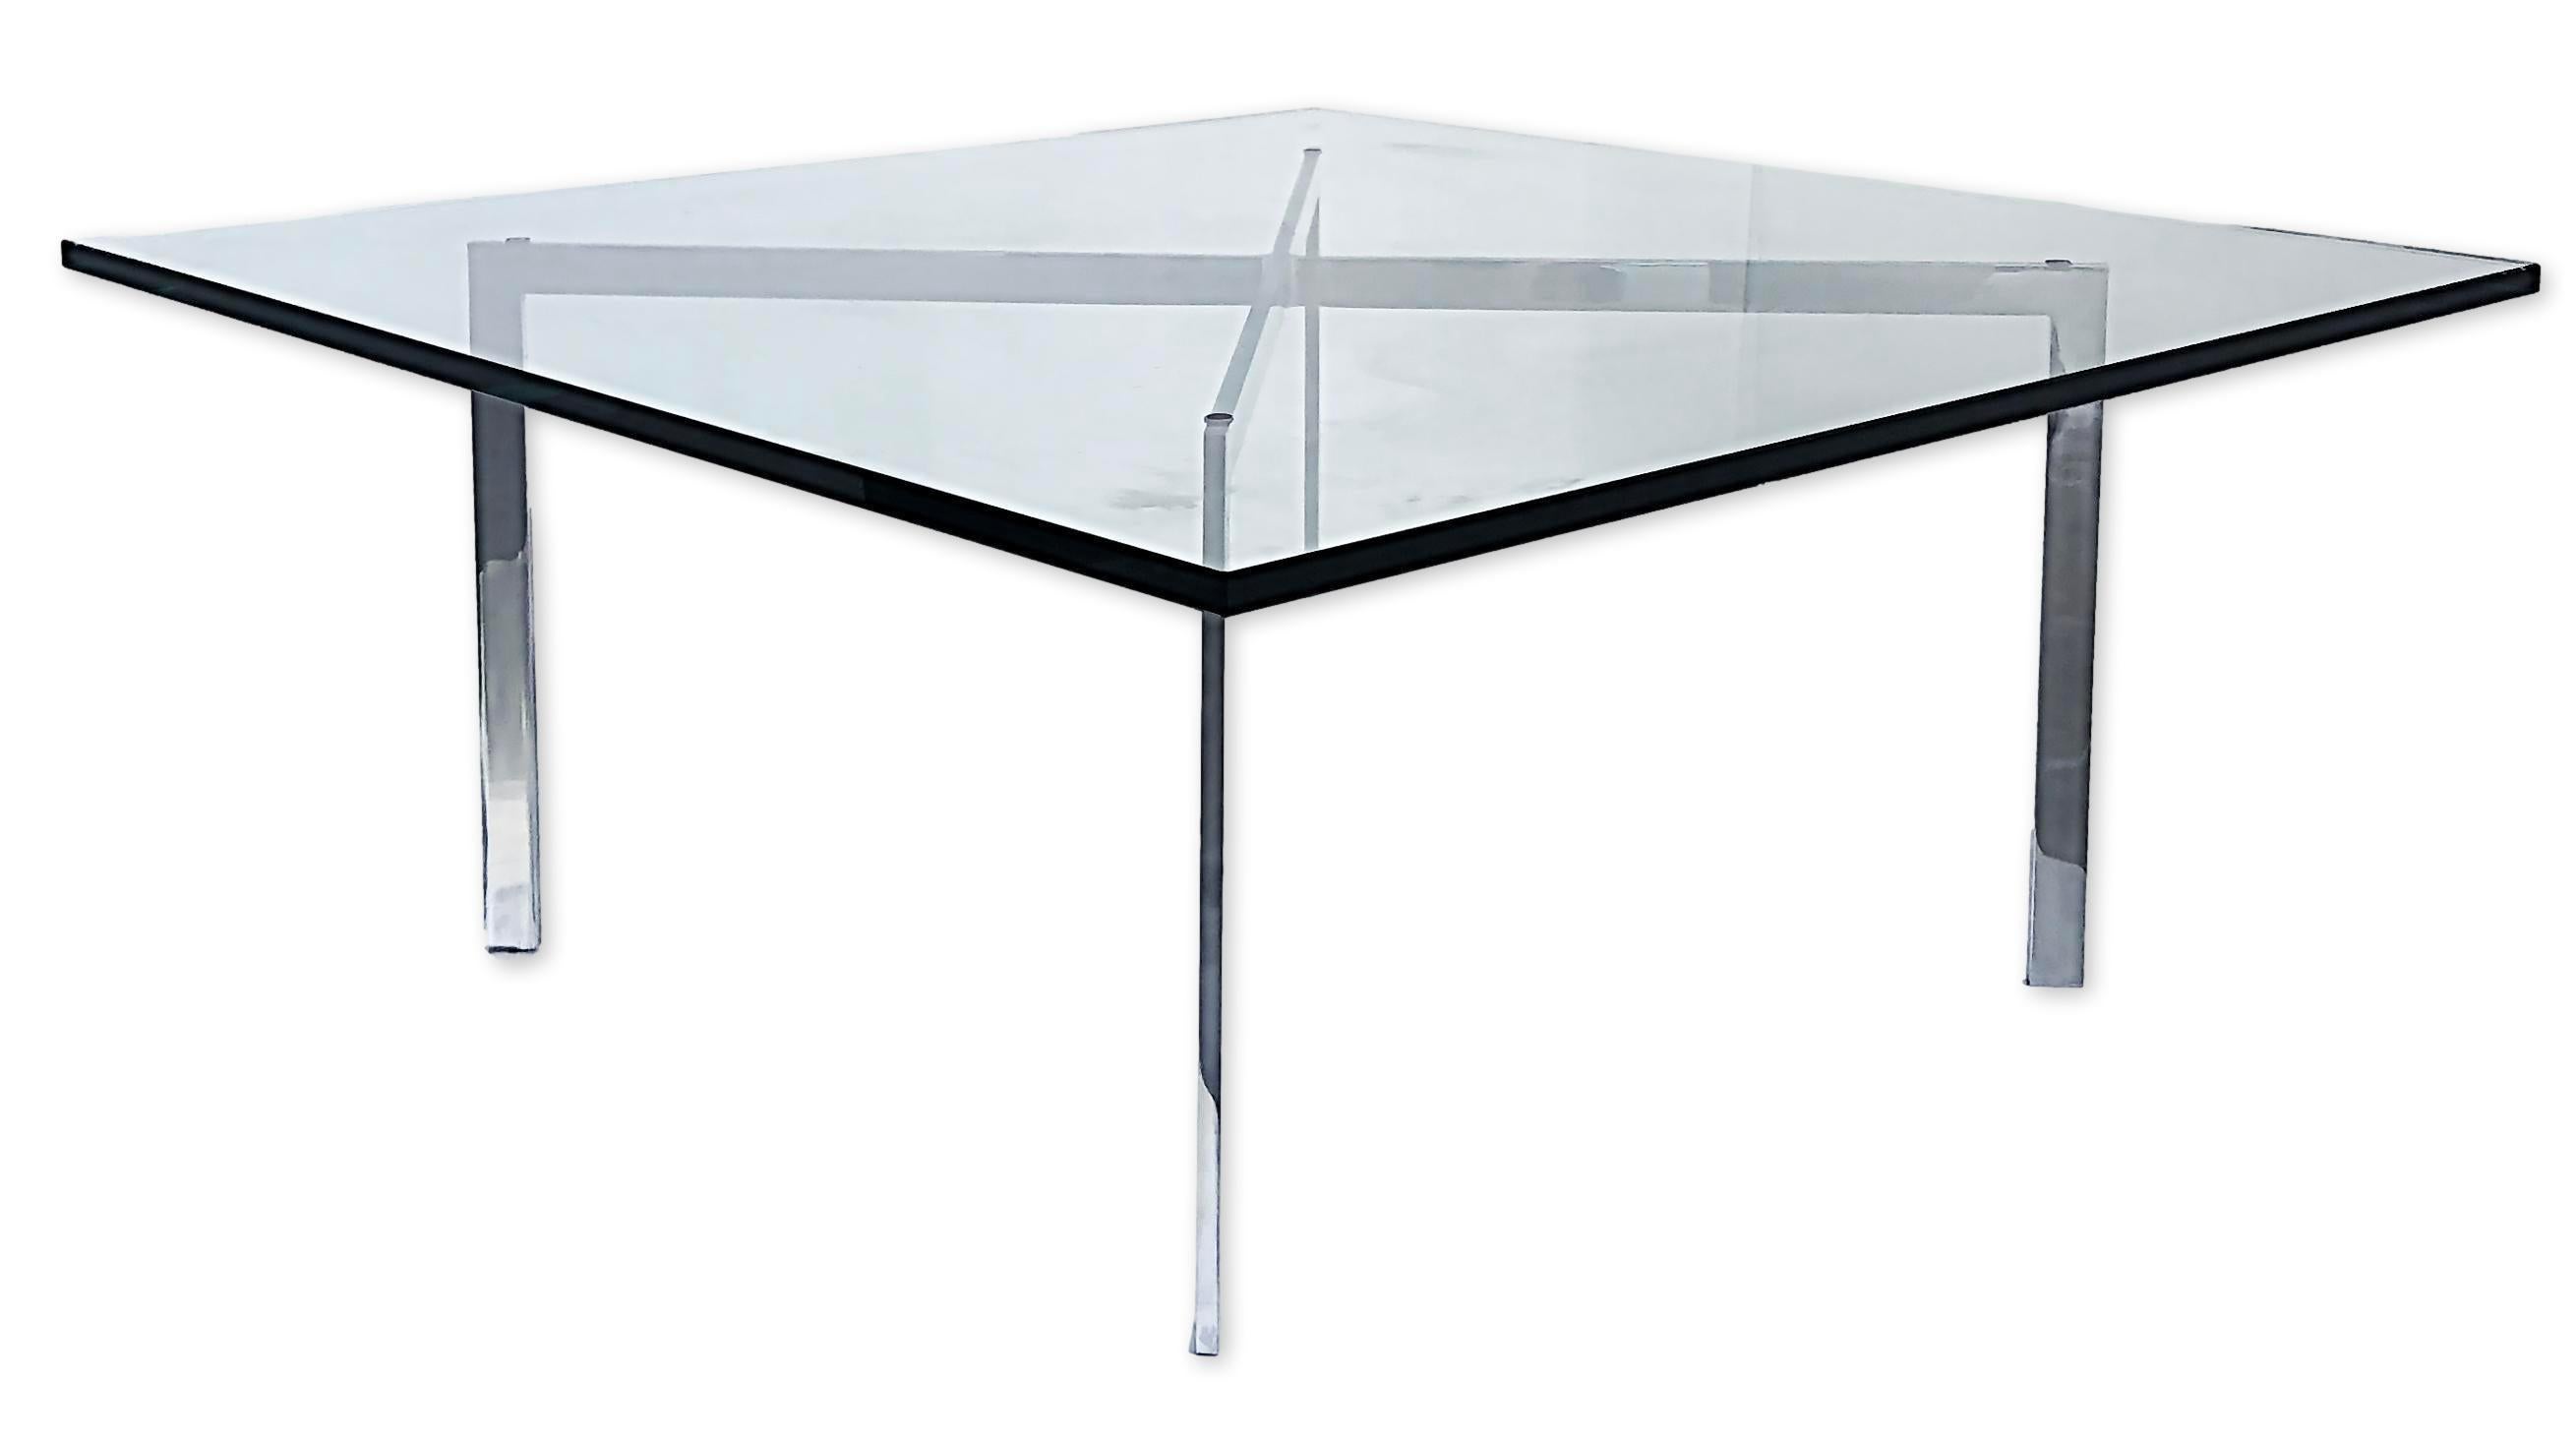 The Barcelona table was created by Ludwig Mies van der Rohe and Lily Reich for the German Pavilion at the 1929 Barcelona Exposition, the Barcelona table features the pure compositional structure that now epitomizes Modern architecture. The clean,